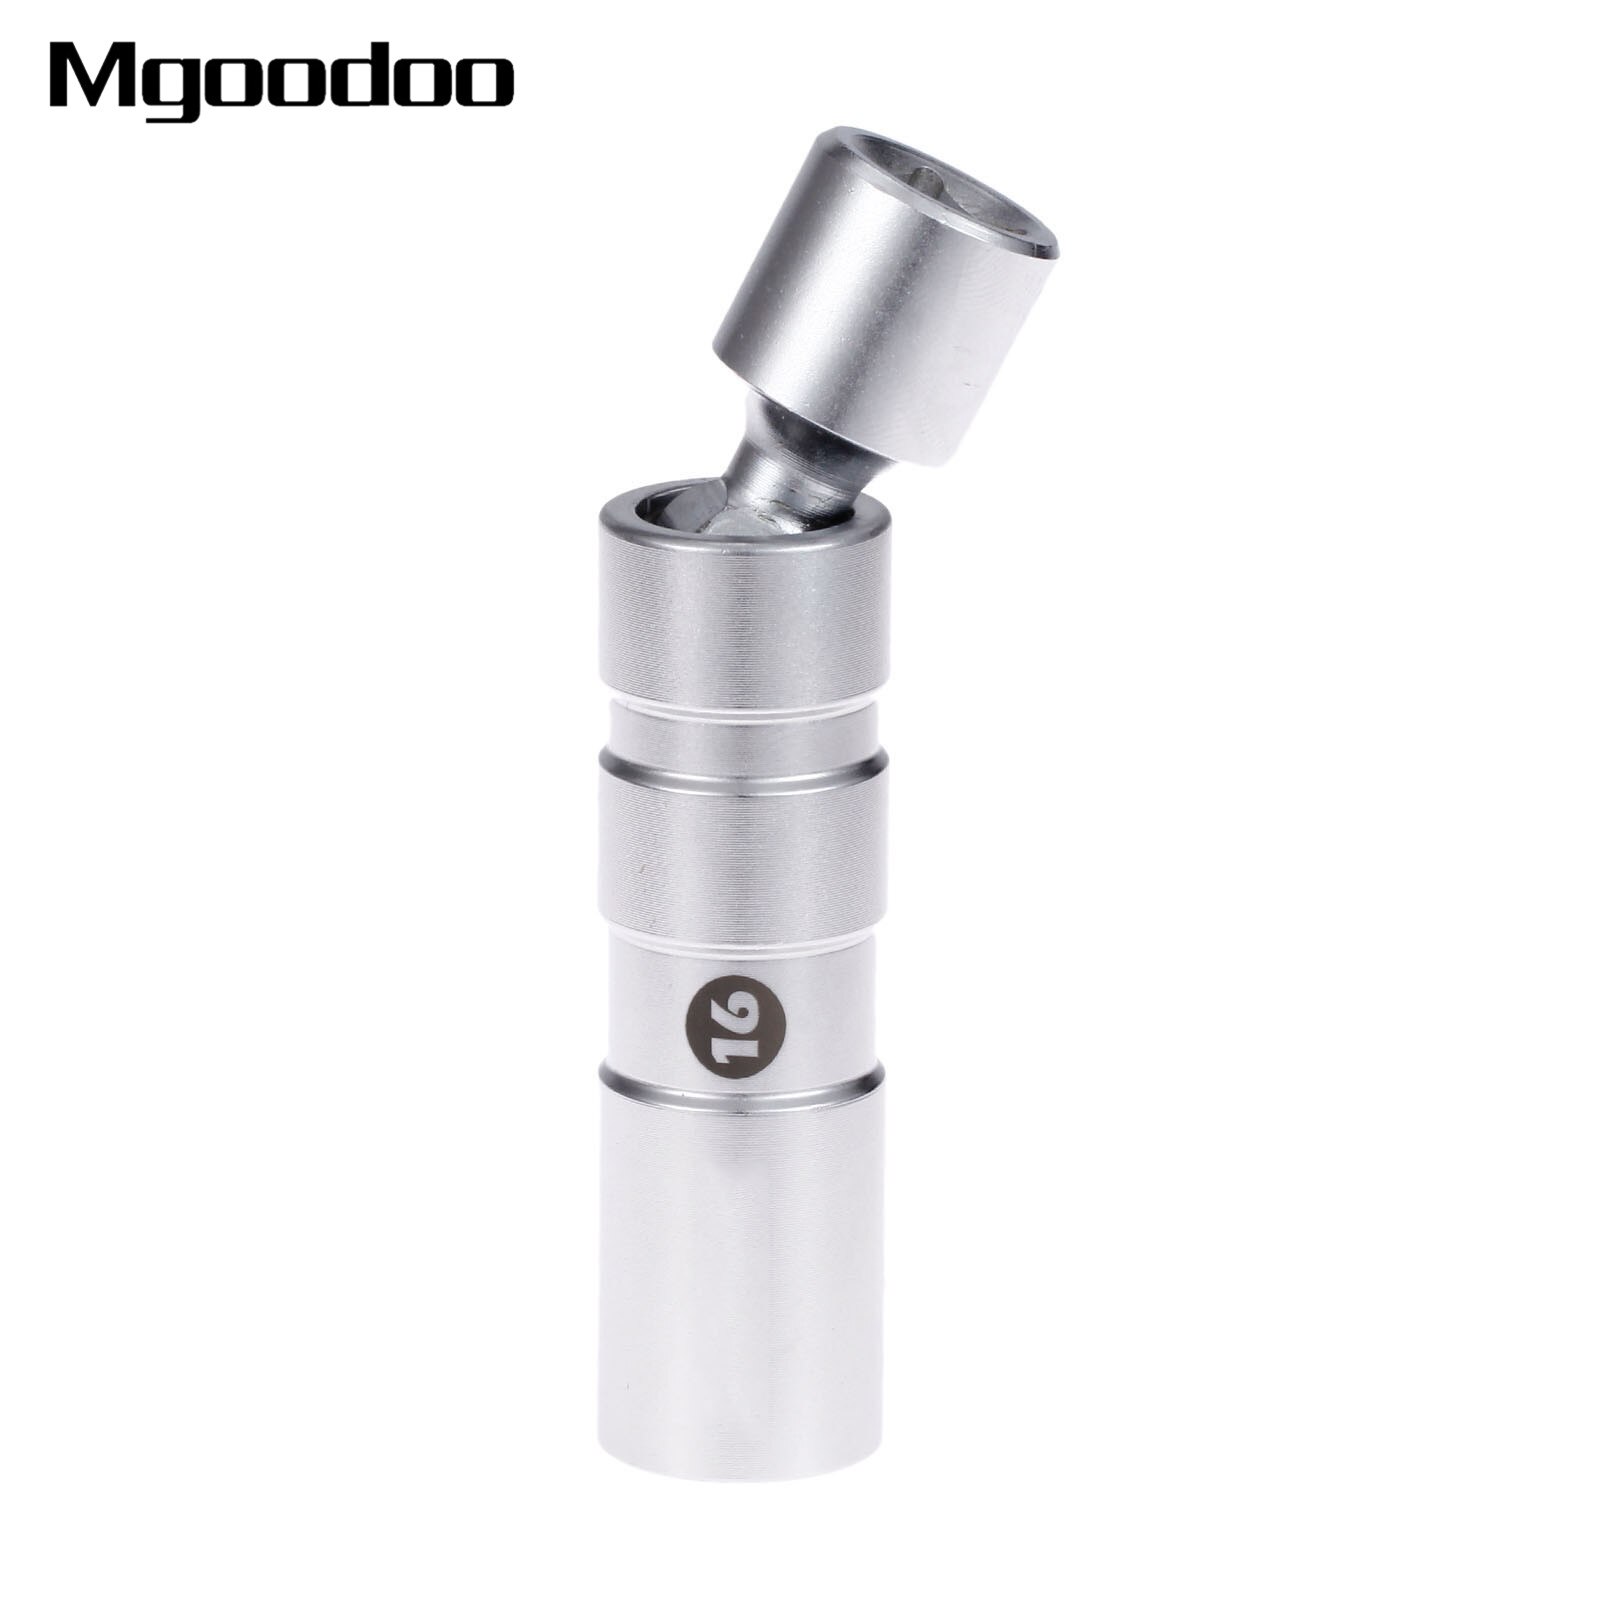 Mgoodoo Universal 16mm Thin Wall Magnetic Swivel Spark Plug Socket 5/8 Inch Drive 12pt 97L Auto Car Removal Tool Accessories